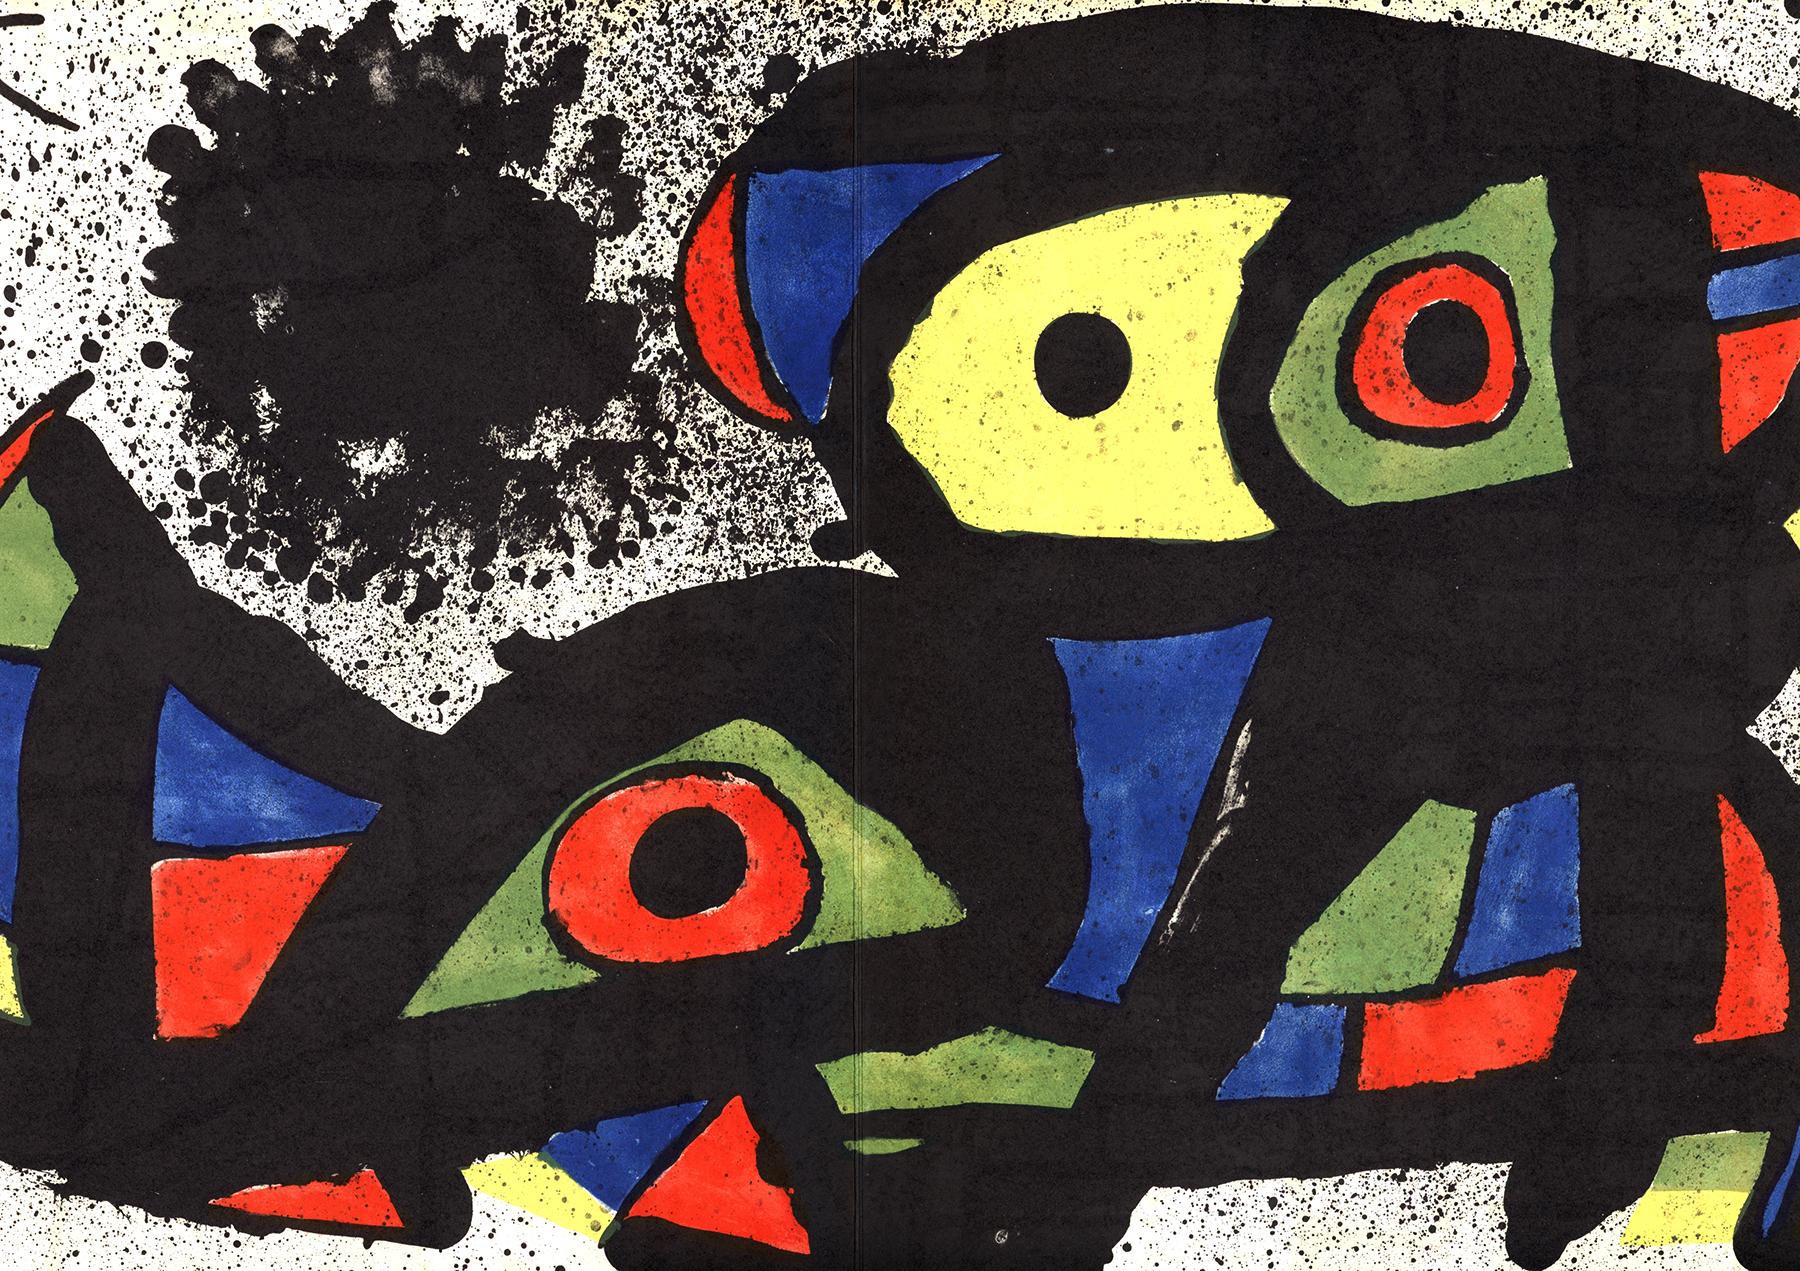 What is Joan Miró's most famous piece?